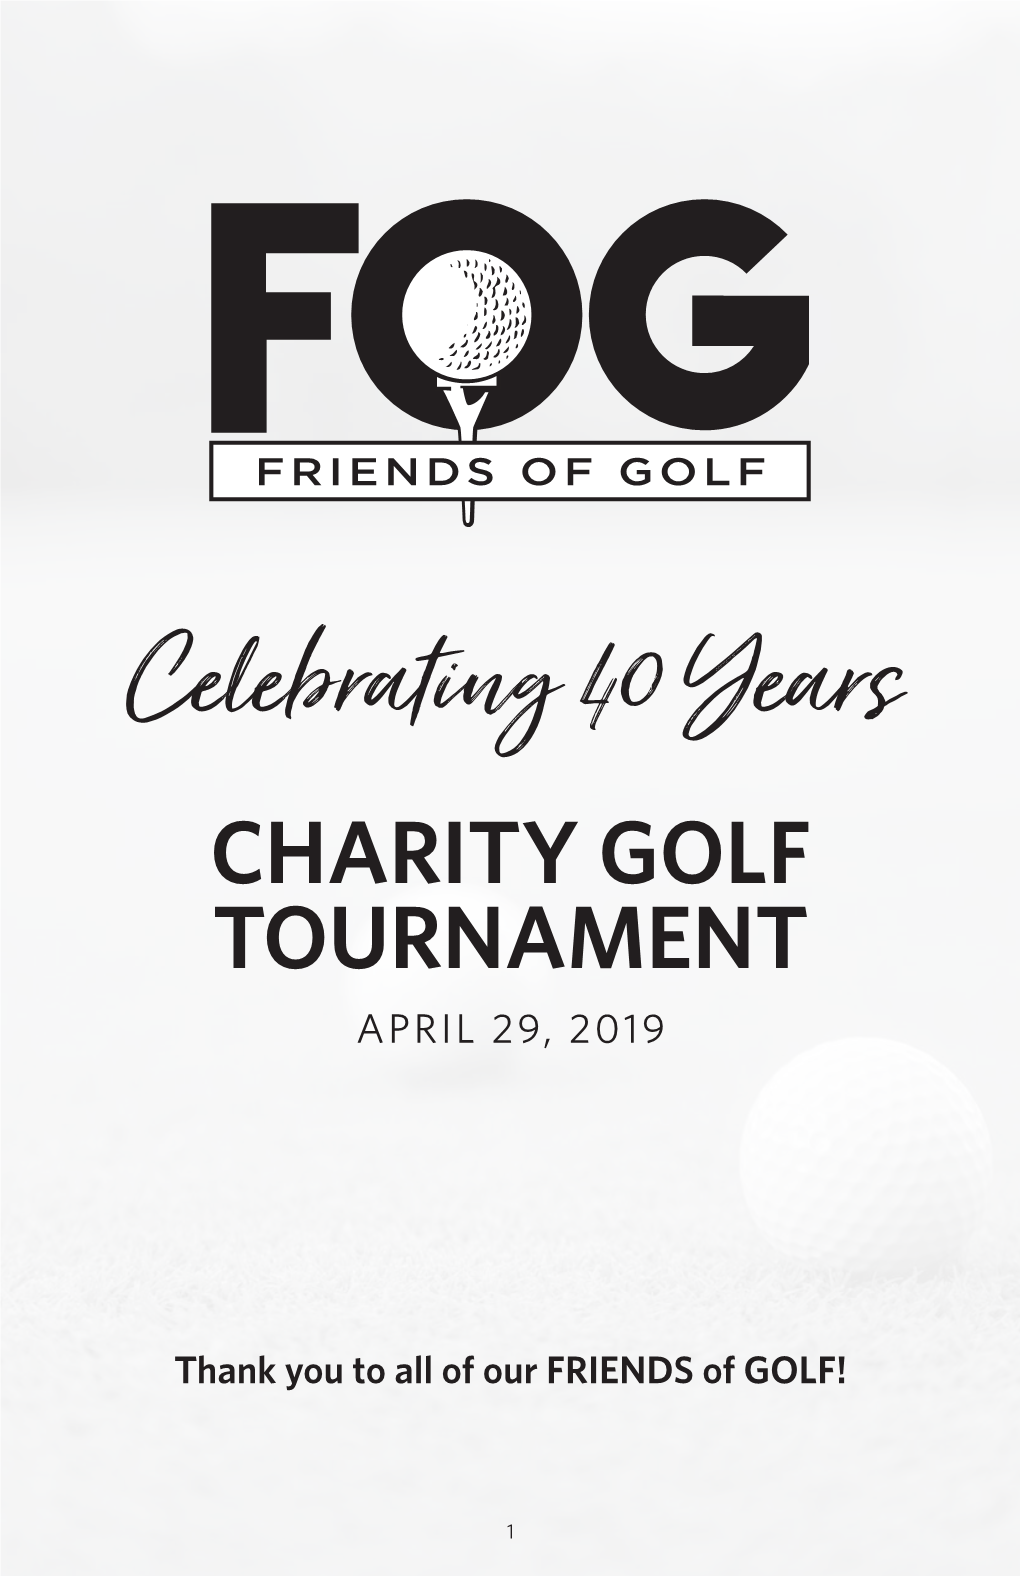 Celebrating 40 Years CHARITY GOLF TOURNAMENT APRIL 29, 2019